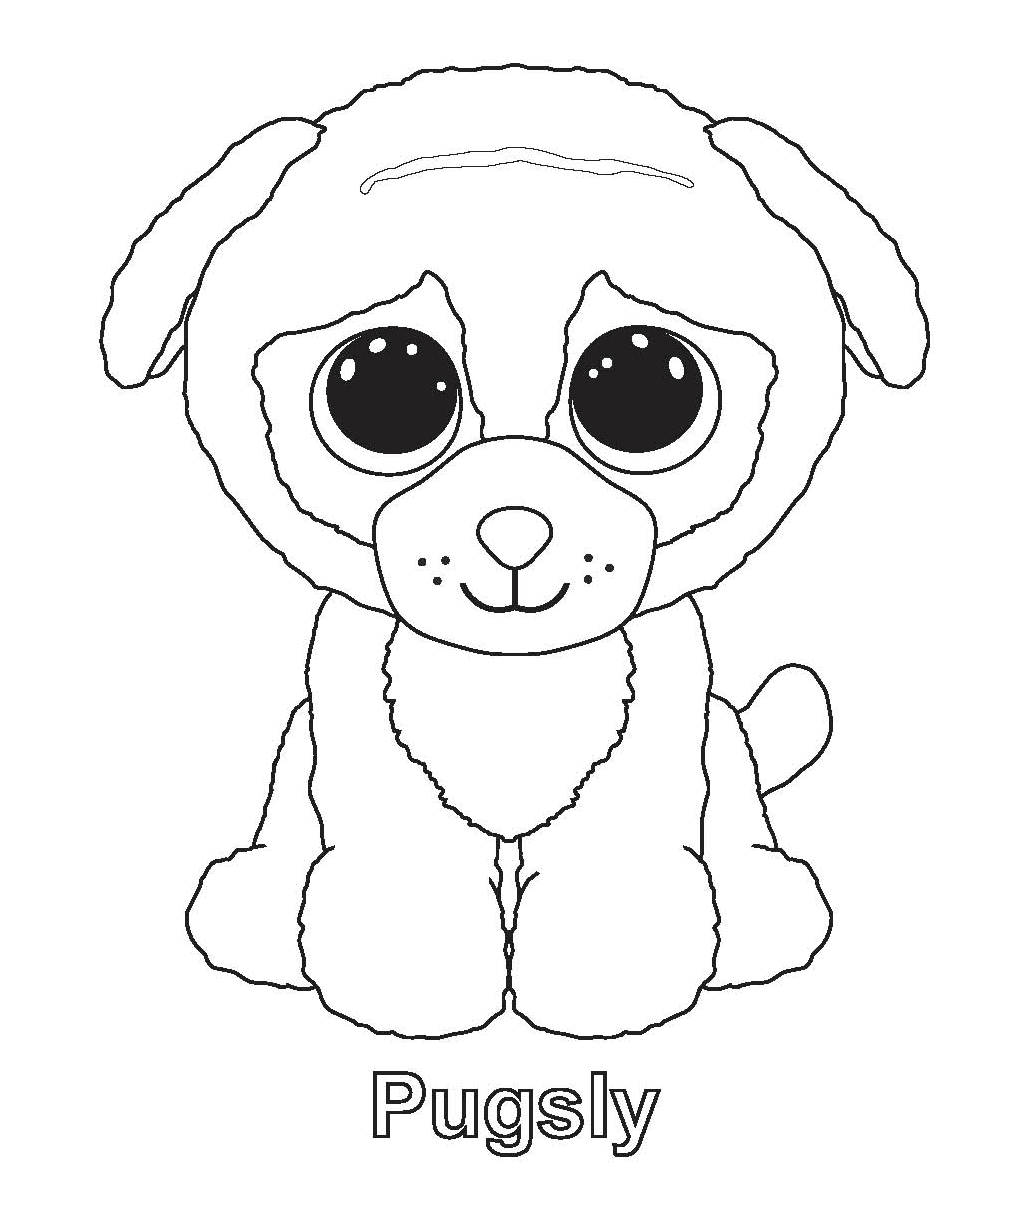 Pugsly Beanie Boos Coloring Pages